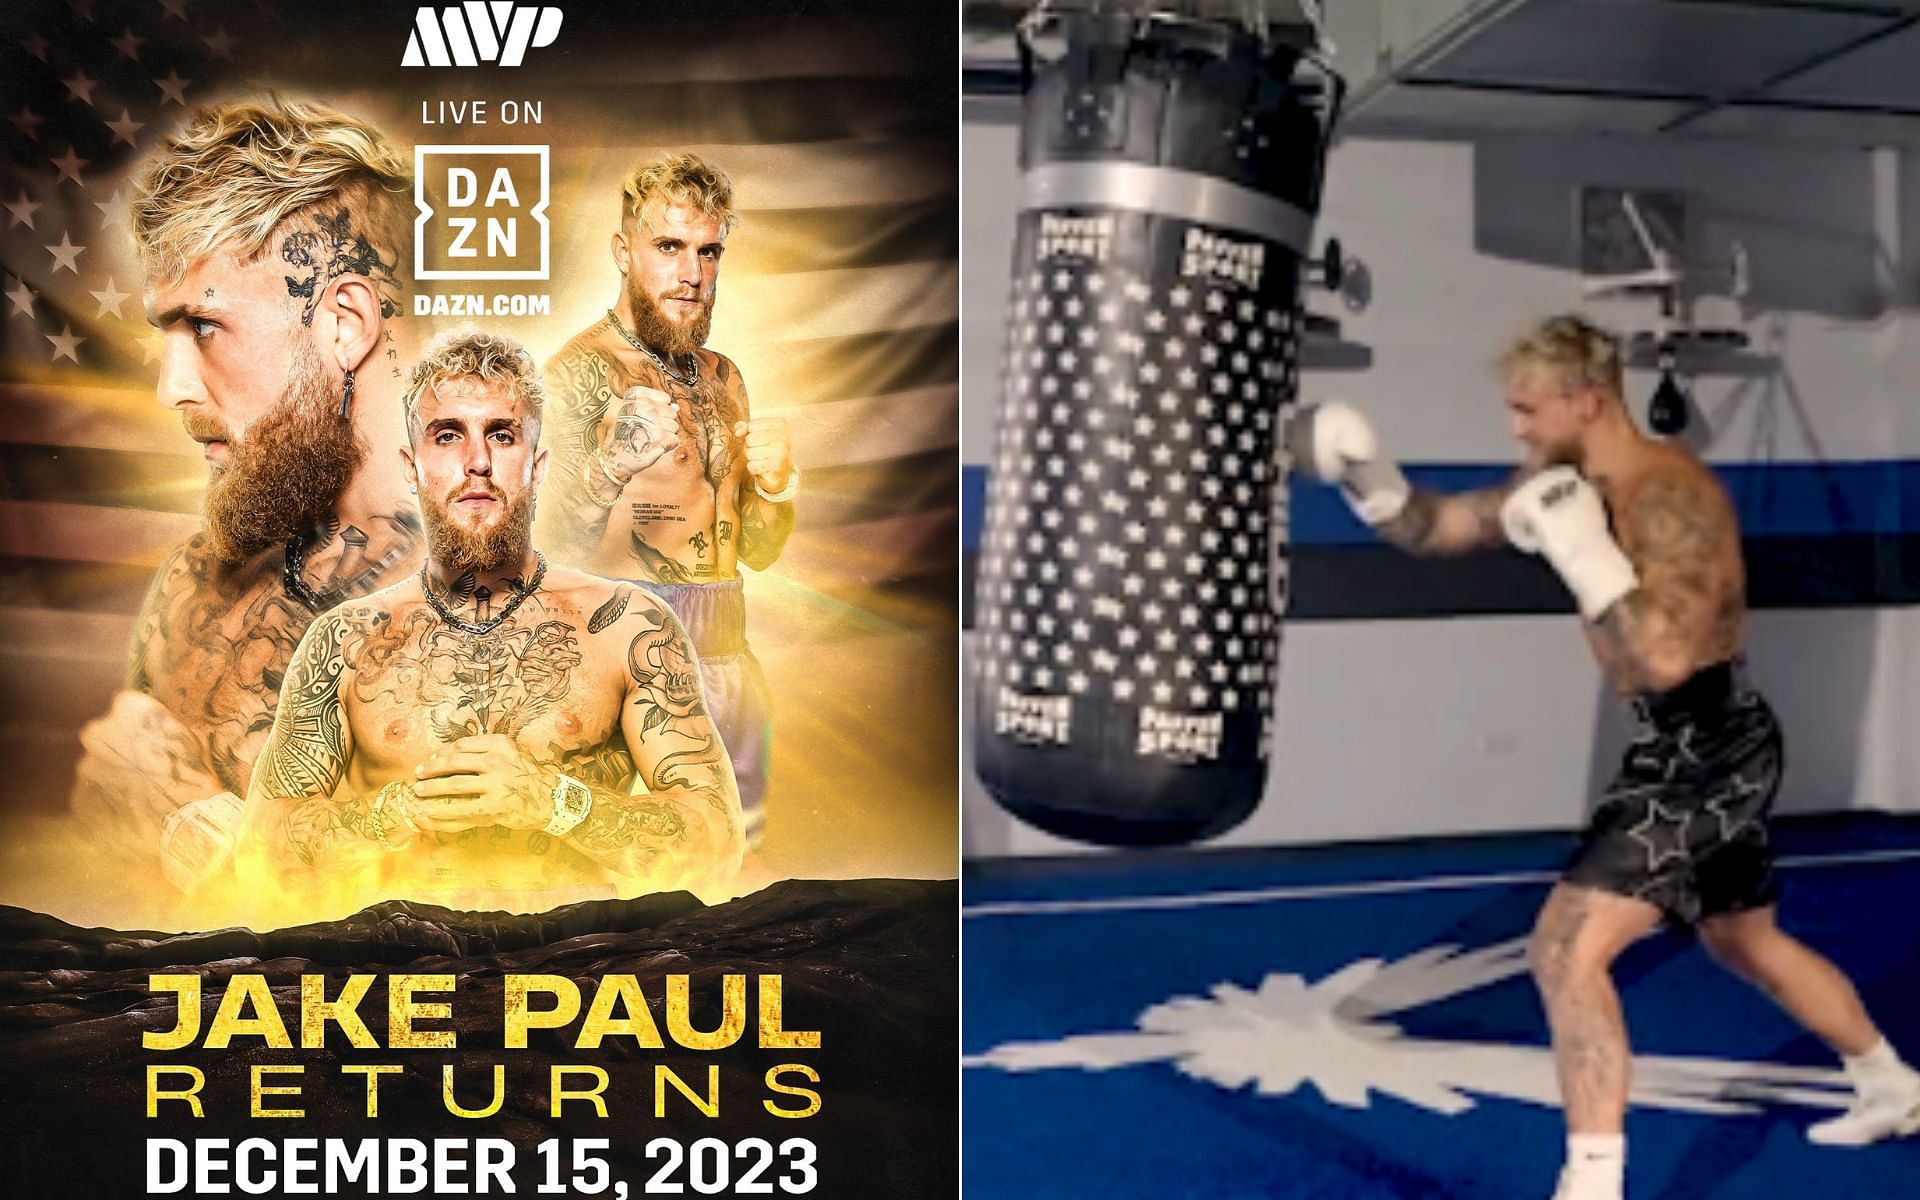 Jake Paul announces his return [Photo credit: @MostVpromotions and @jakepaul - X]